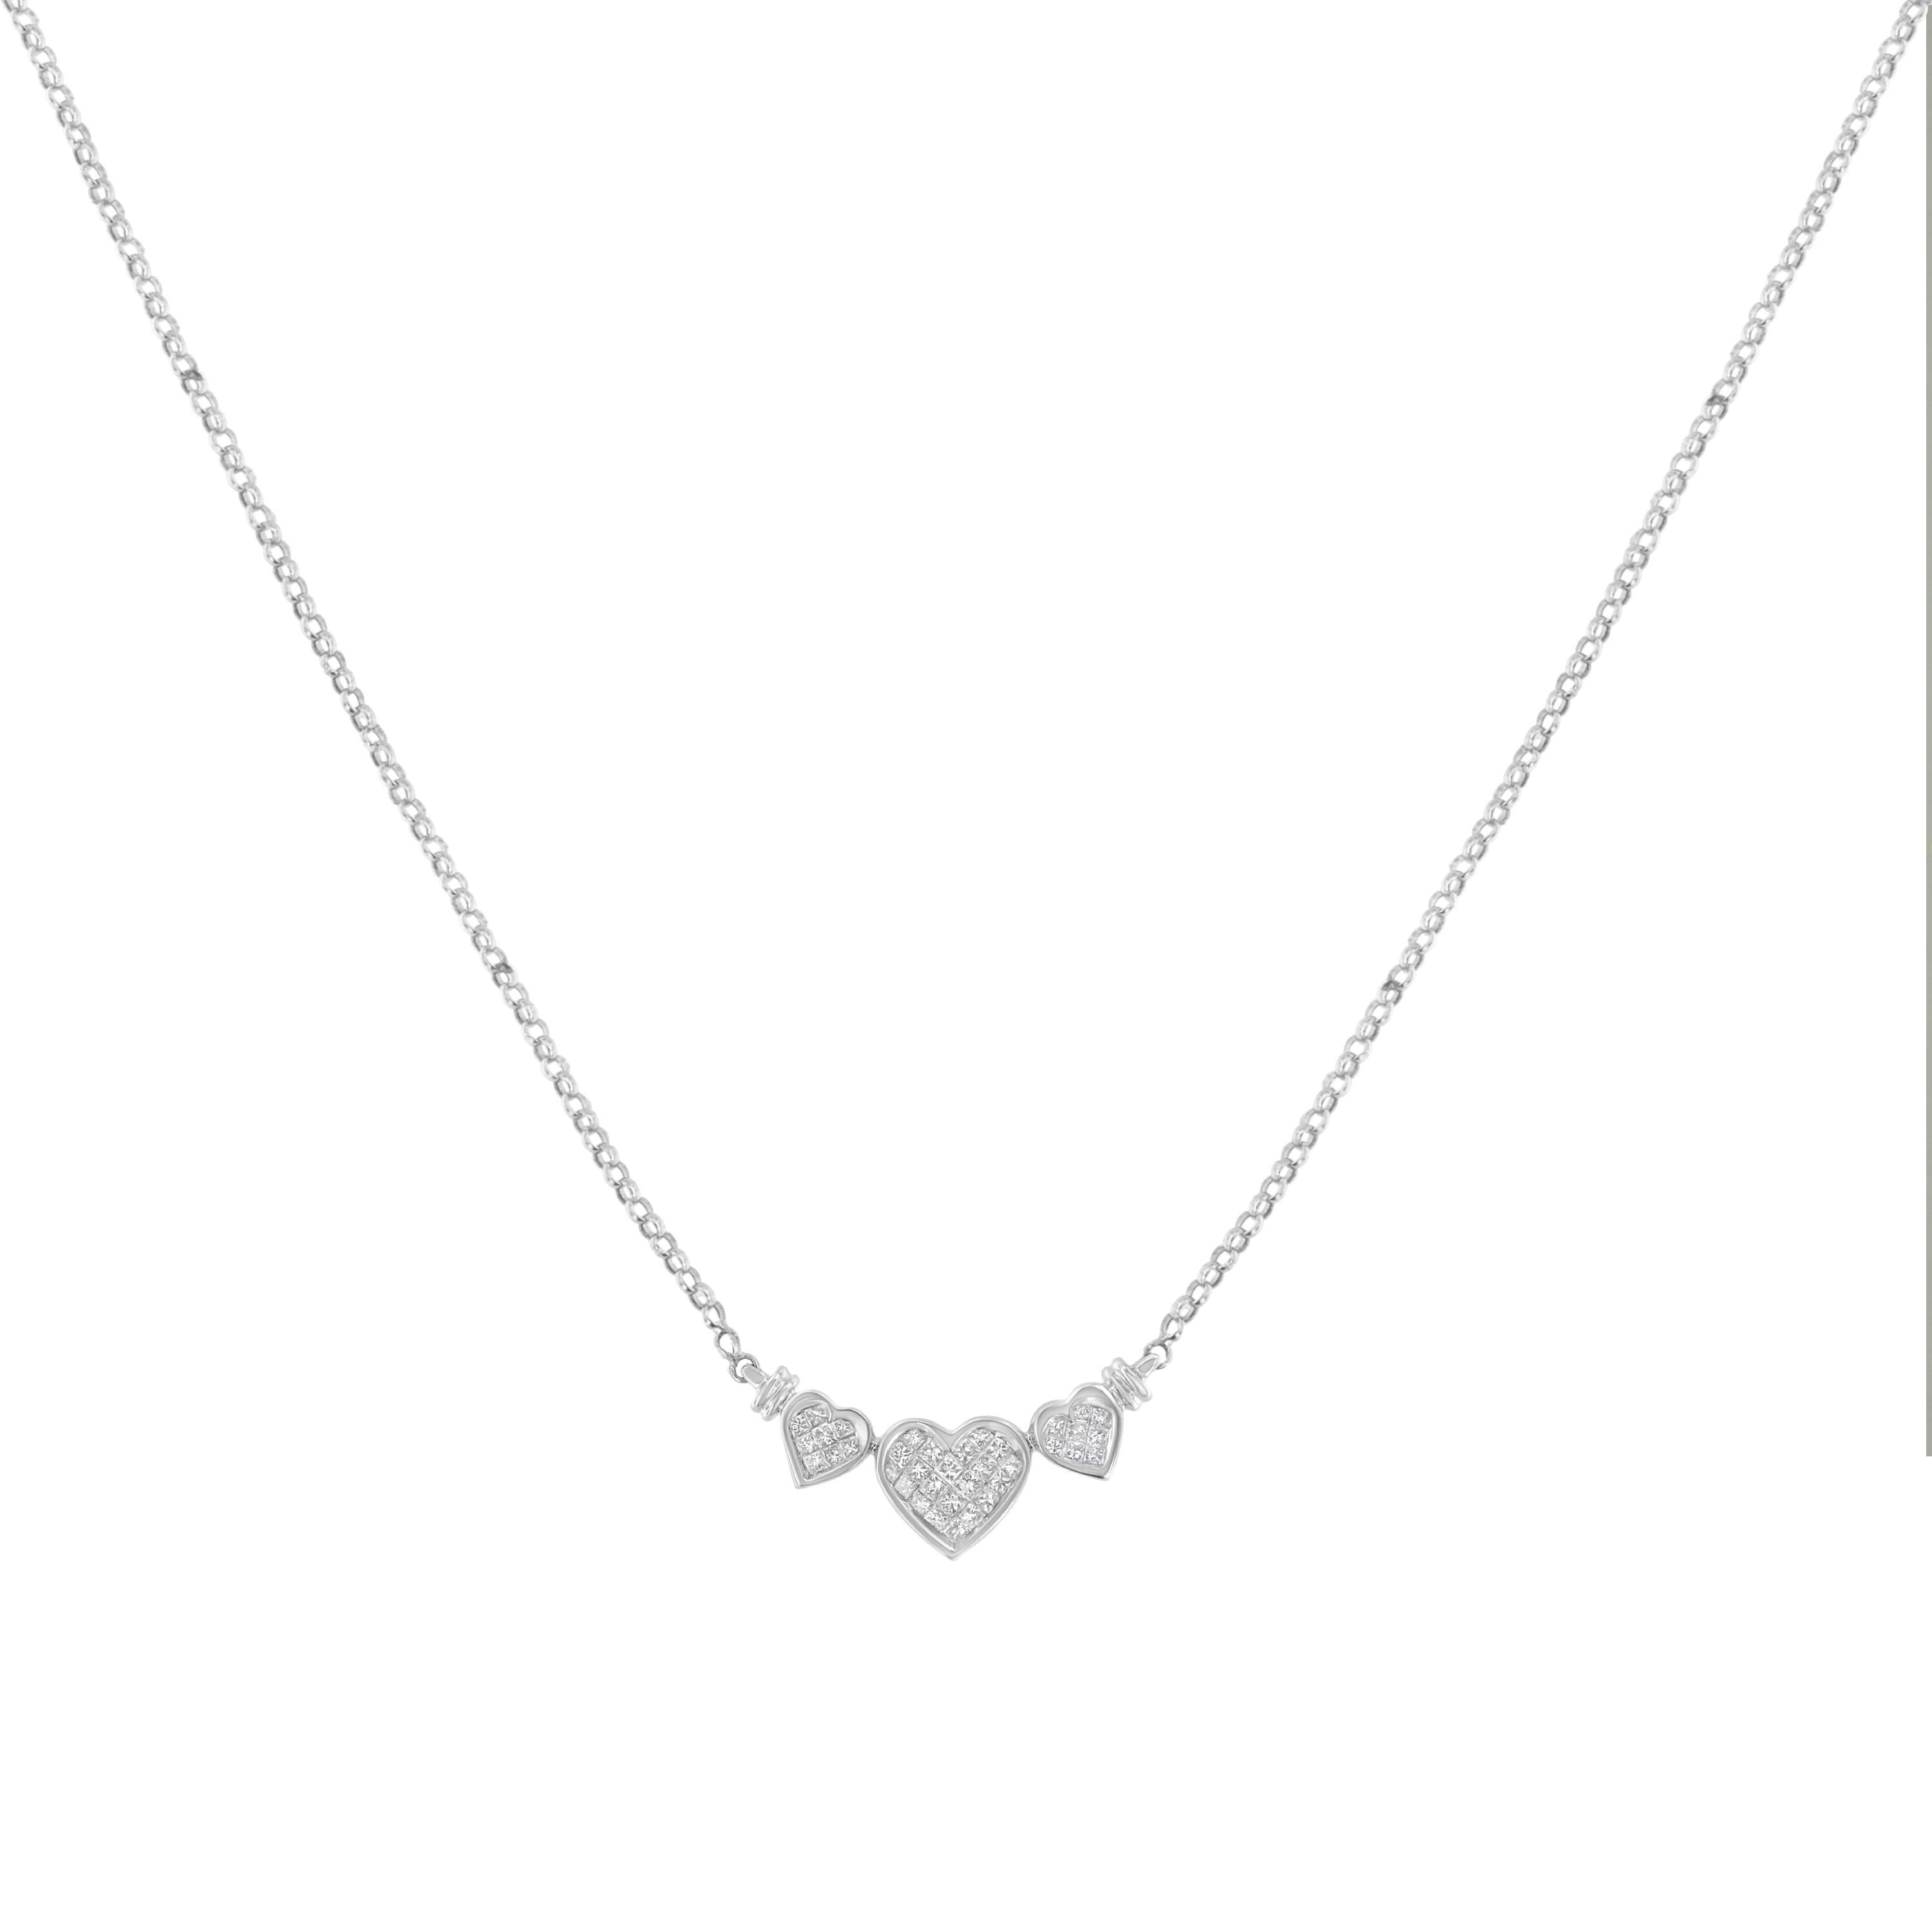 A large heart sits between two smaller ones in this lovely statement necklace. Invisible set, glimmering princess cut diamonds inlay the hearts. Fashioned in 14k white gold and with 1 carat TDW of diamonds this necklace will make you fall in love. A